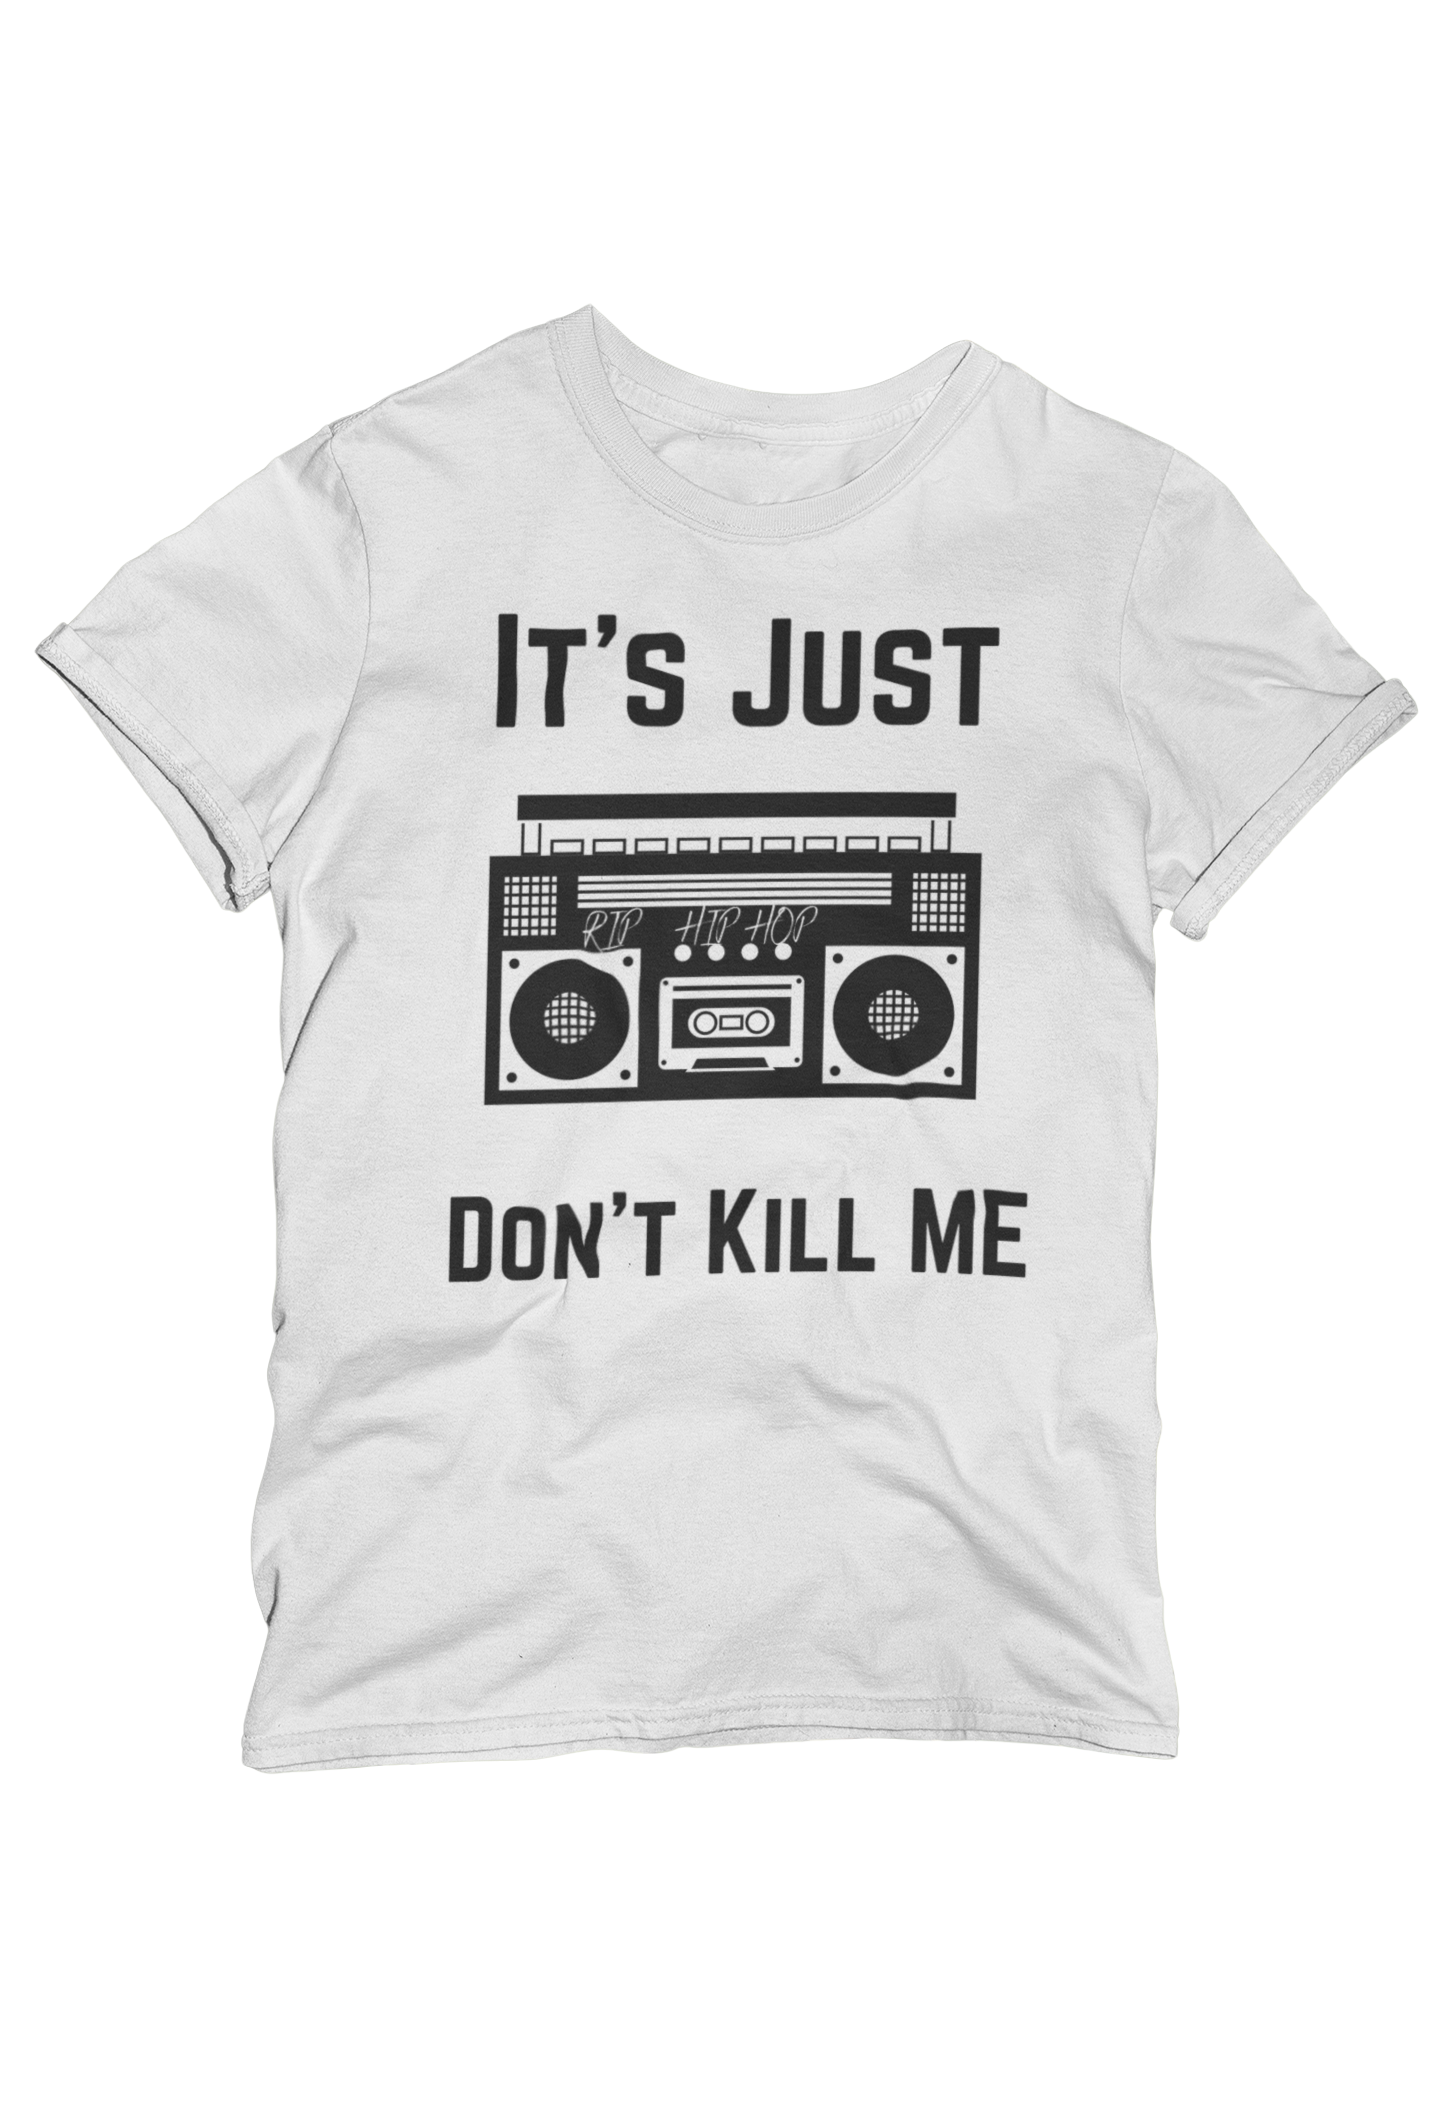 Mens "It's Just Music" T-Shirts